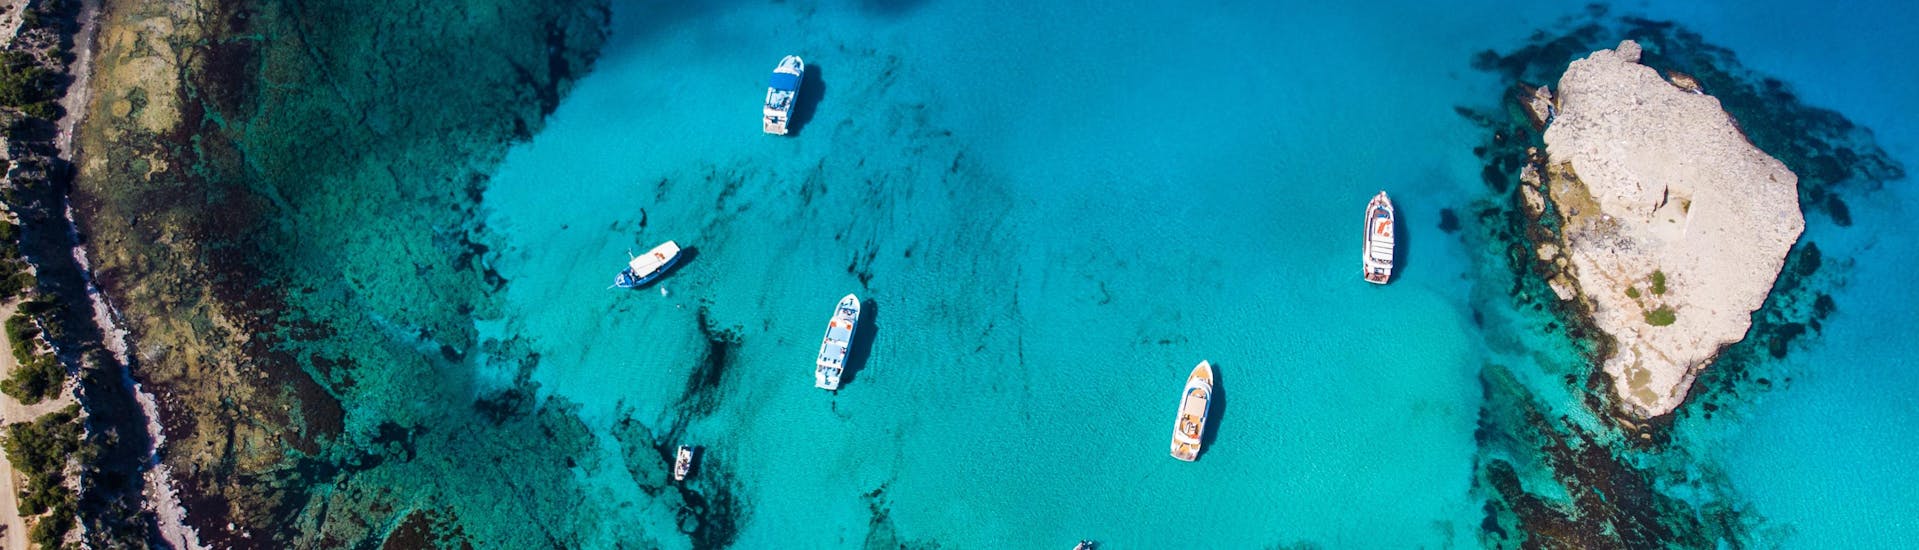 Aerial view over the blue lagoon, a popular destination of boat trips from Latchi.